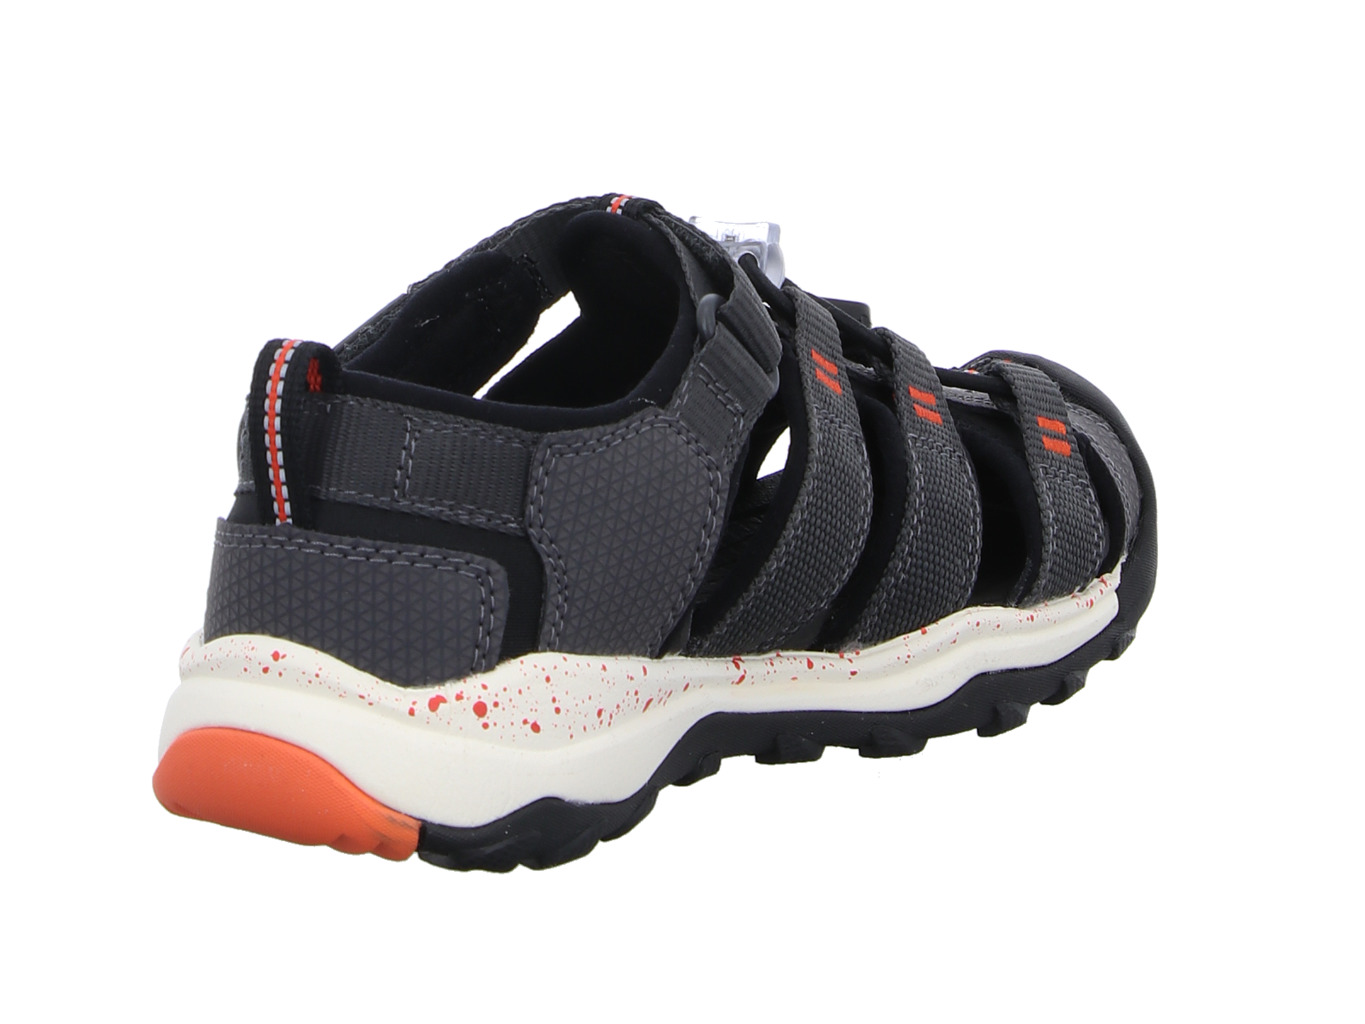 keen_newport_neo_h2_magnet_spicy_or_1018426_na_2166